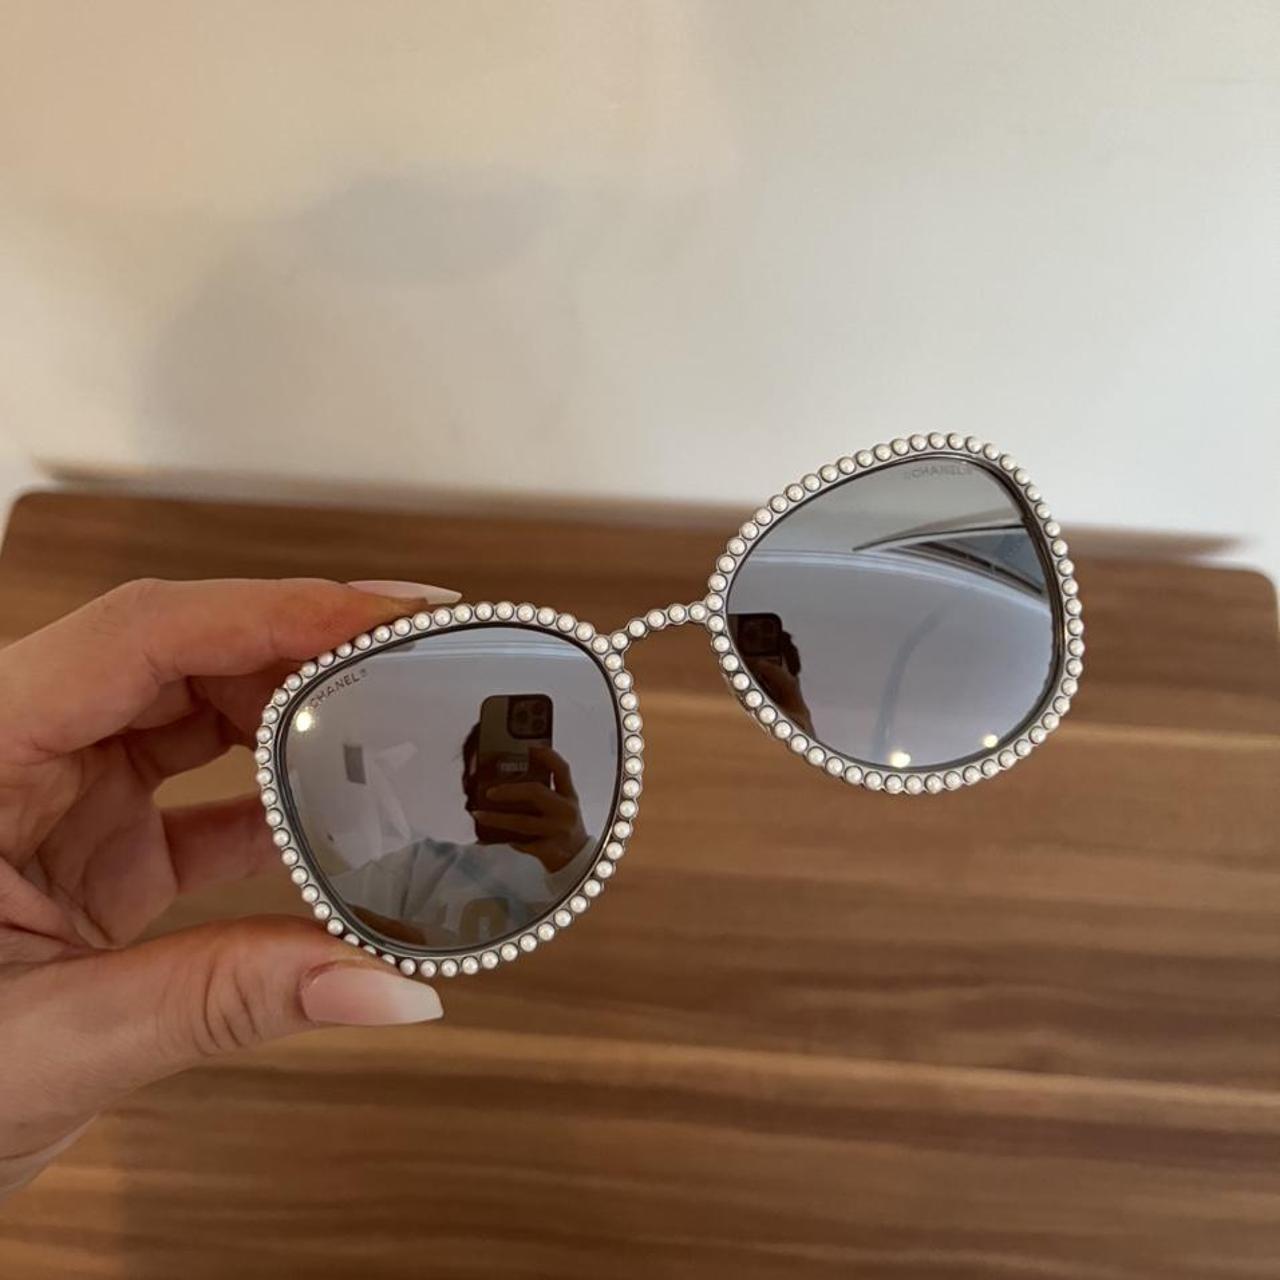 Vintage Chanel round pearl sunglasses, 100%